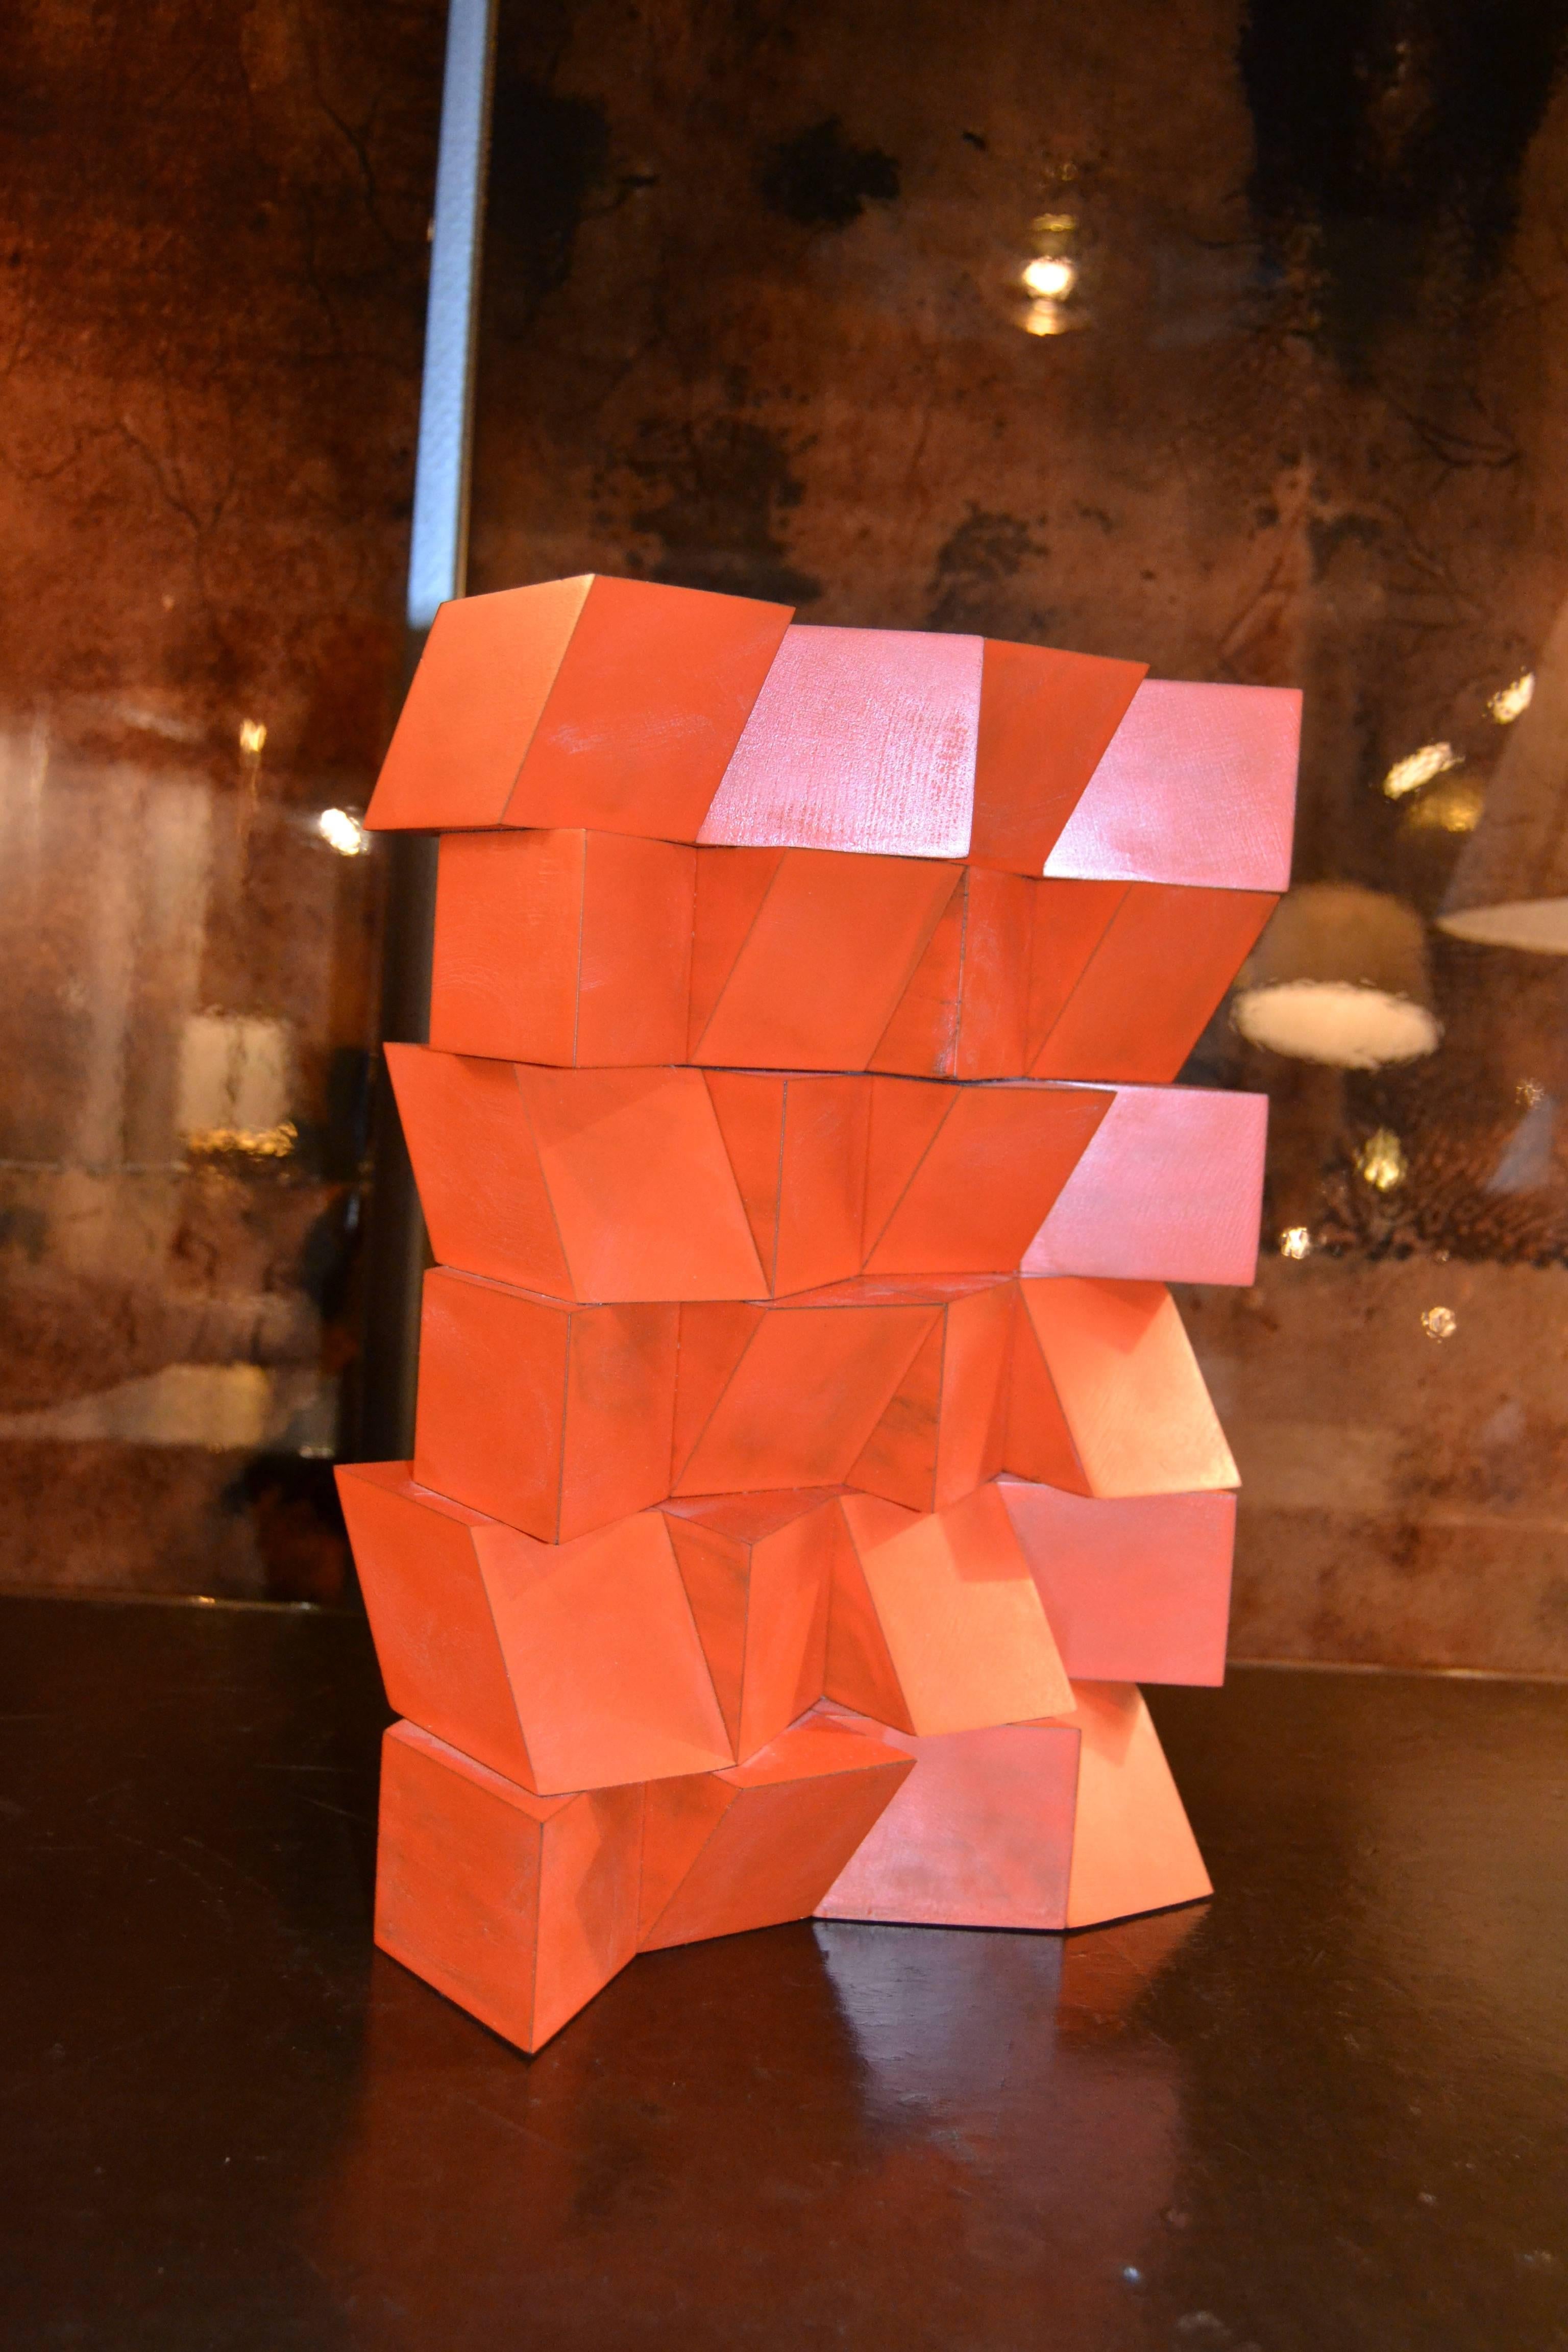 Beechwood orange sculpture with a great movement.